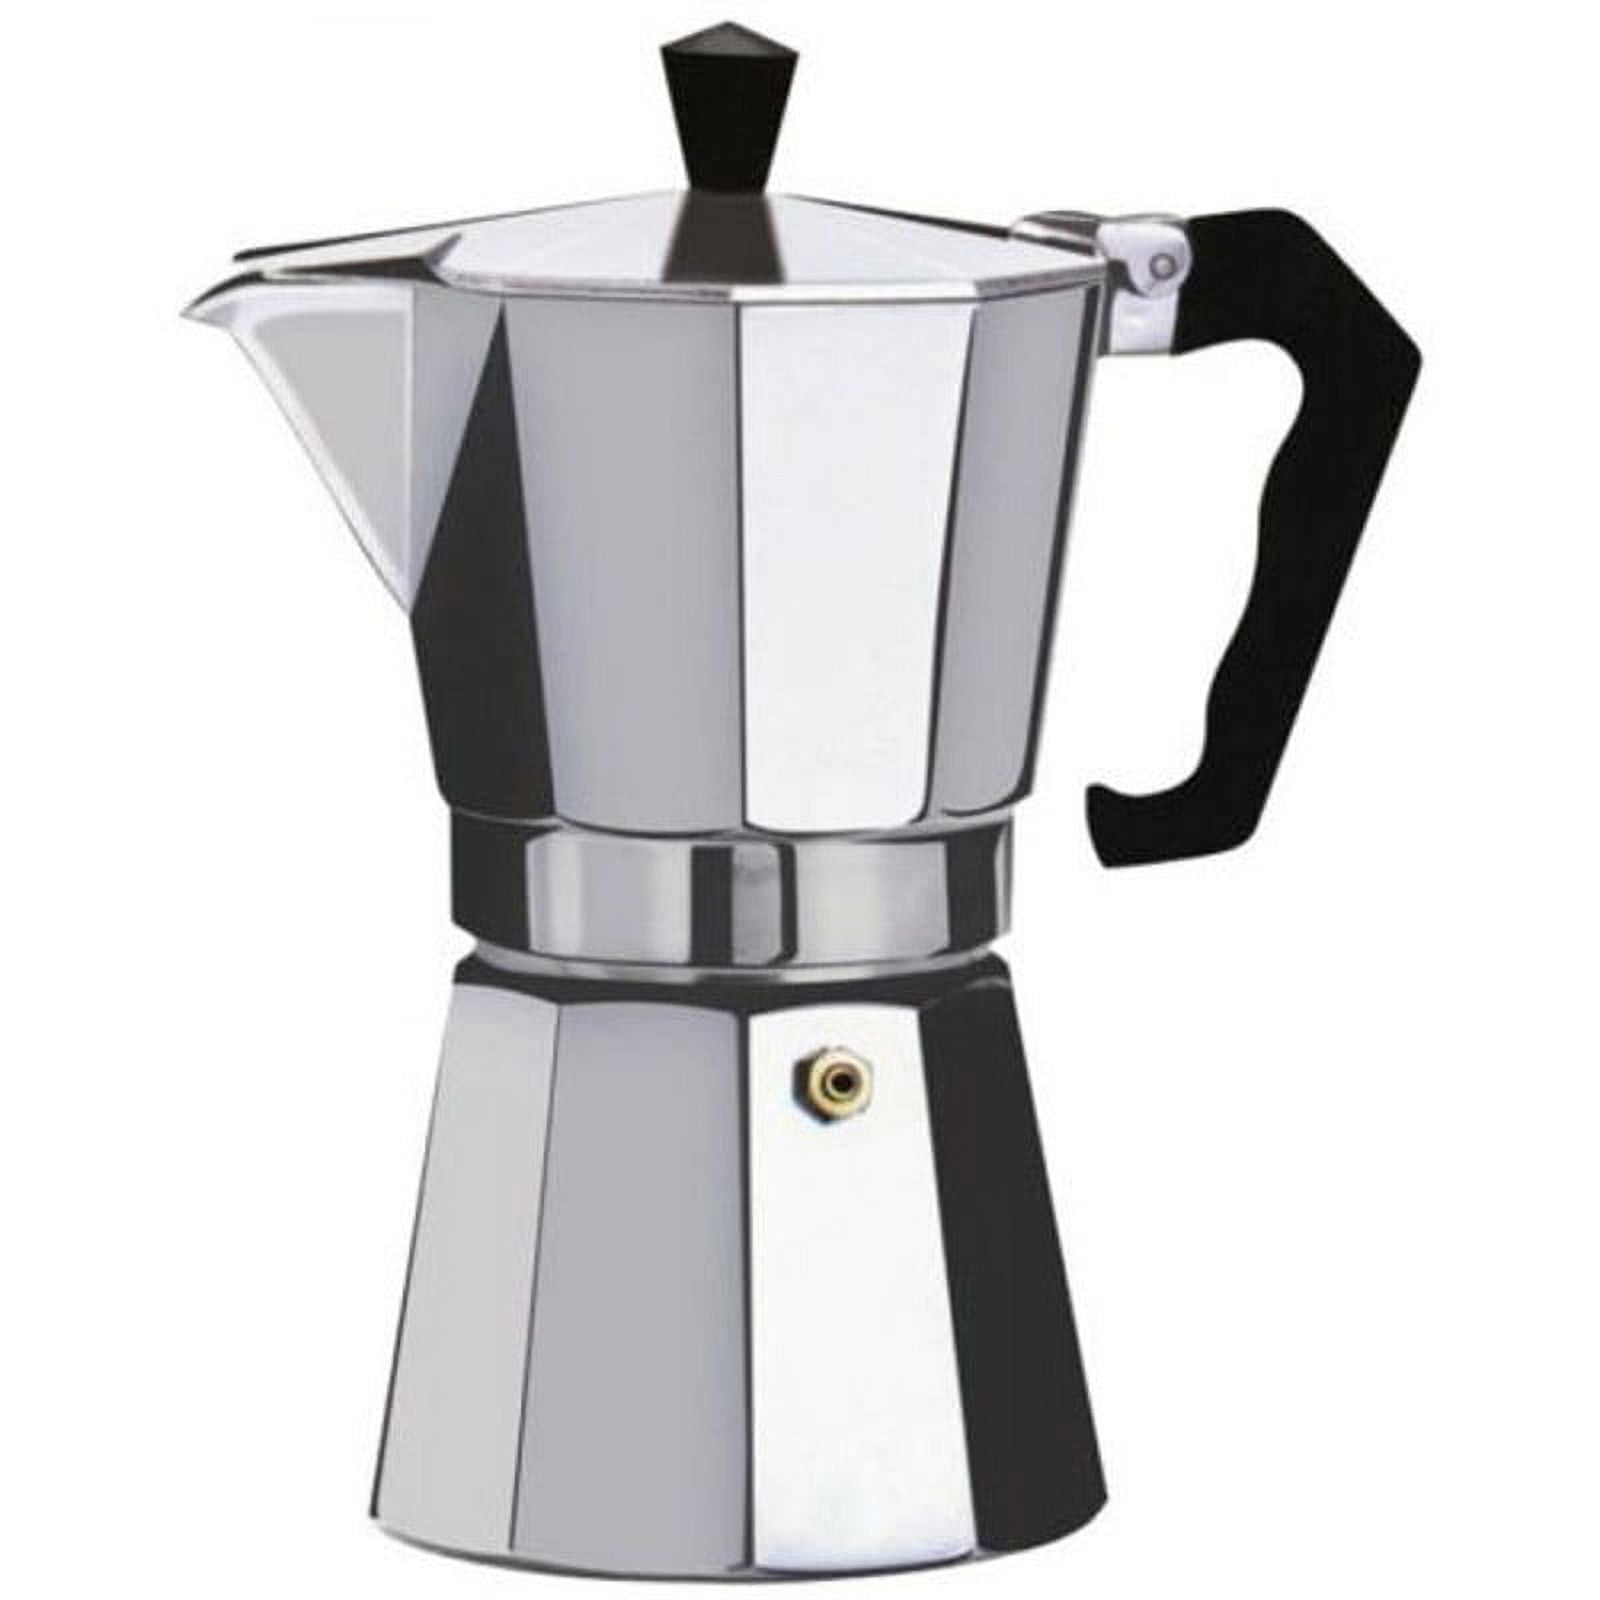 Velox Electric Electric Espresso Maker Made in Italy - KitchenArts